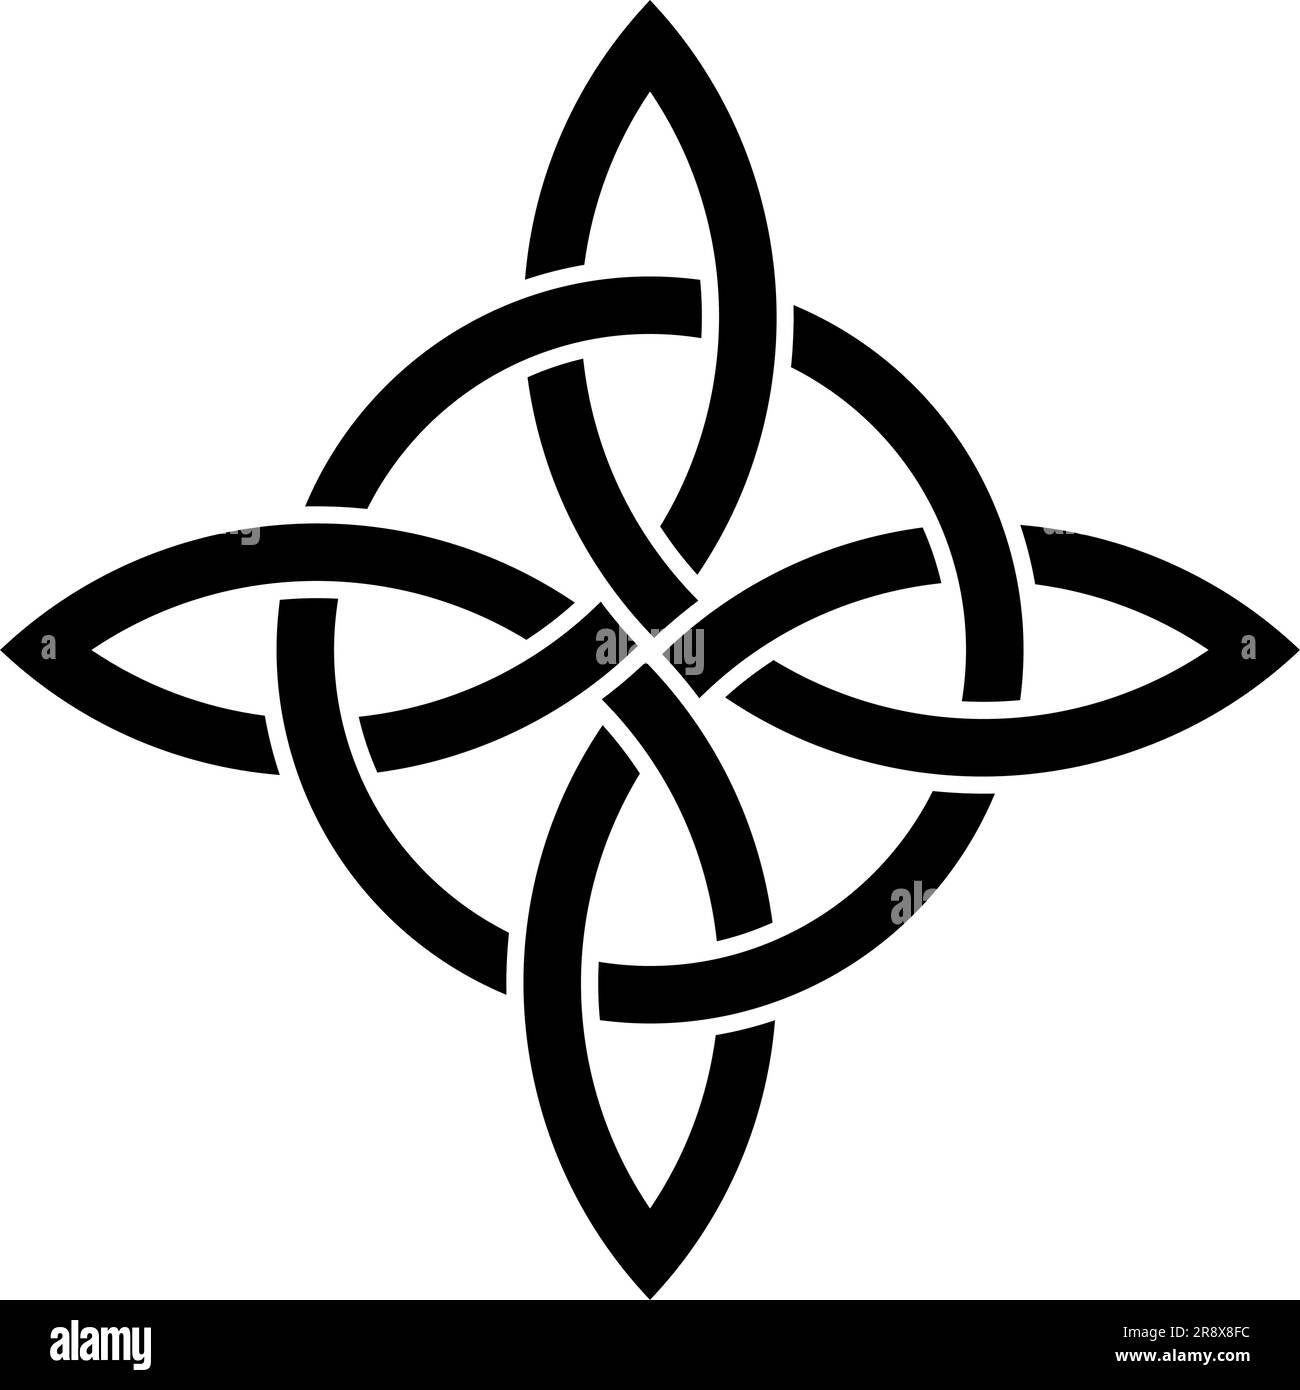 Bowen knot in black. Celtic symbol known as true lover's knot. The Bowen knot symbolizes a man's true love and loyalty to his woman. Stock Vector